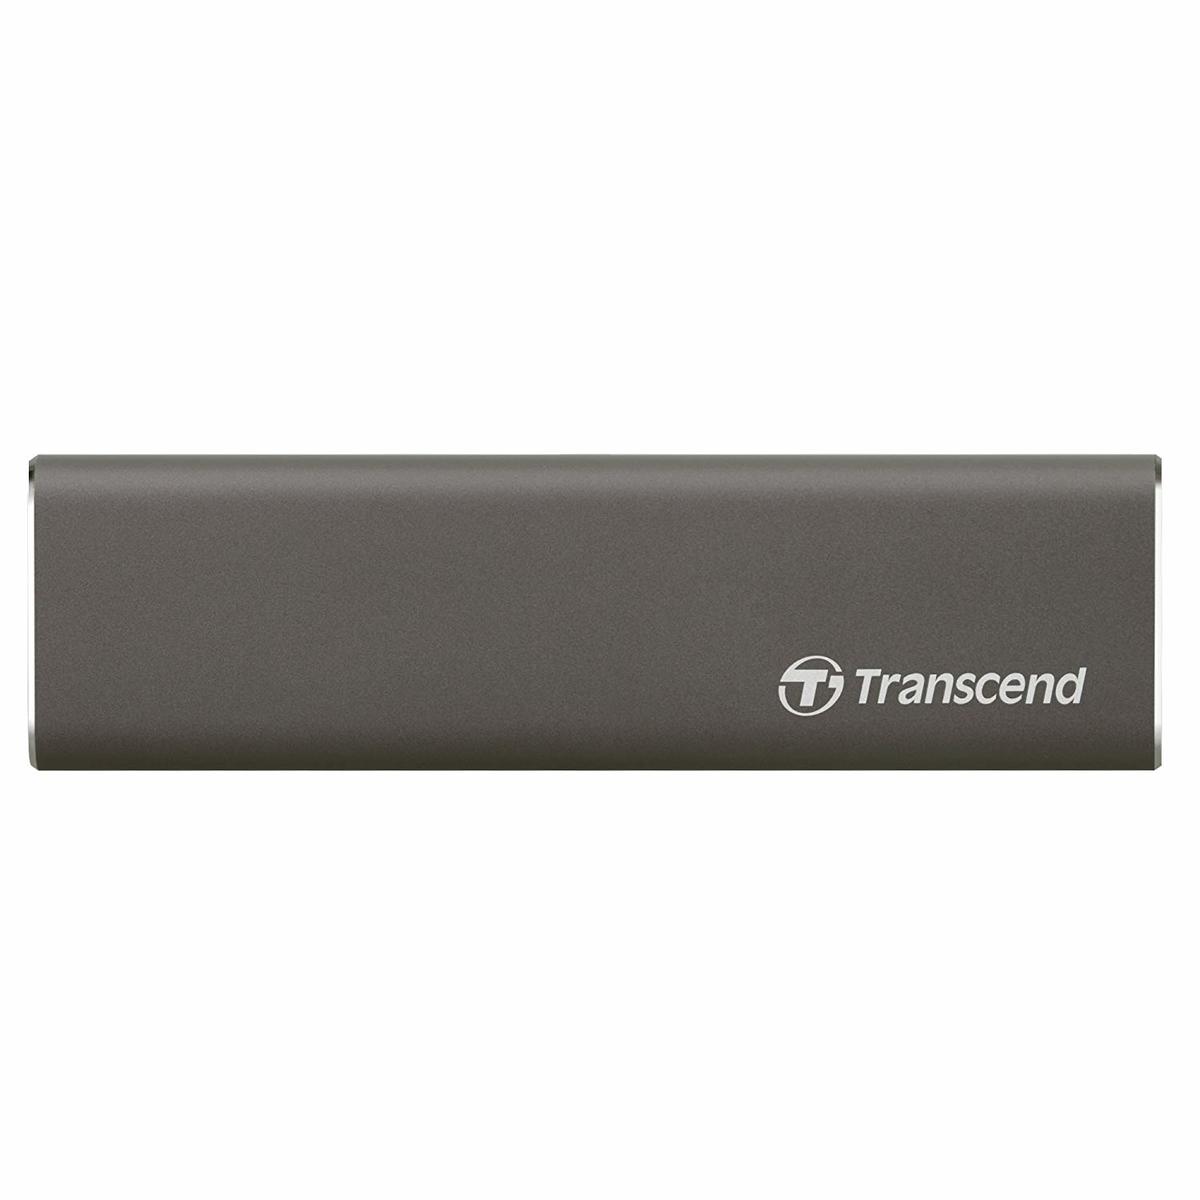 Transcned Solid State Drive TS240GSSD600 240GB